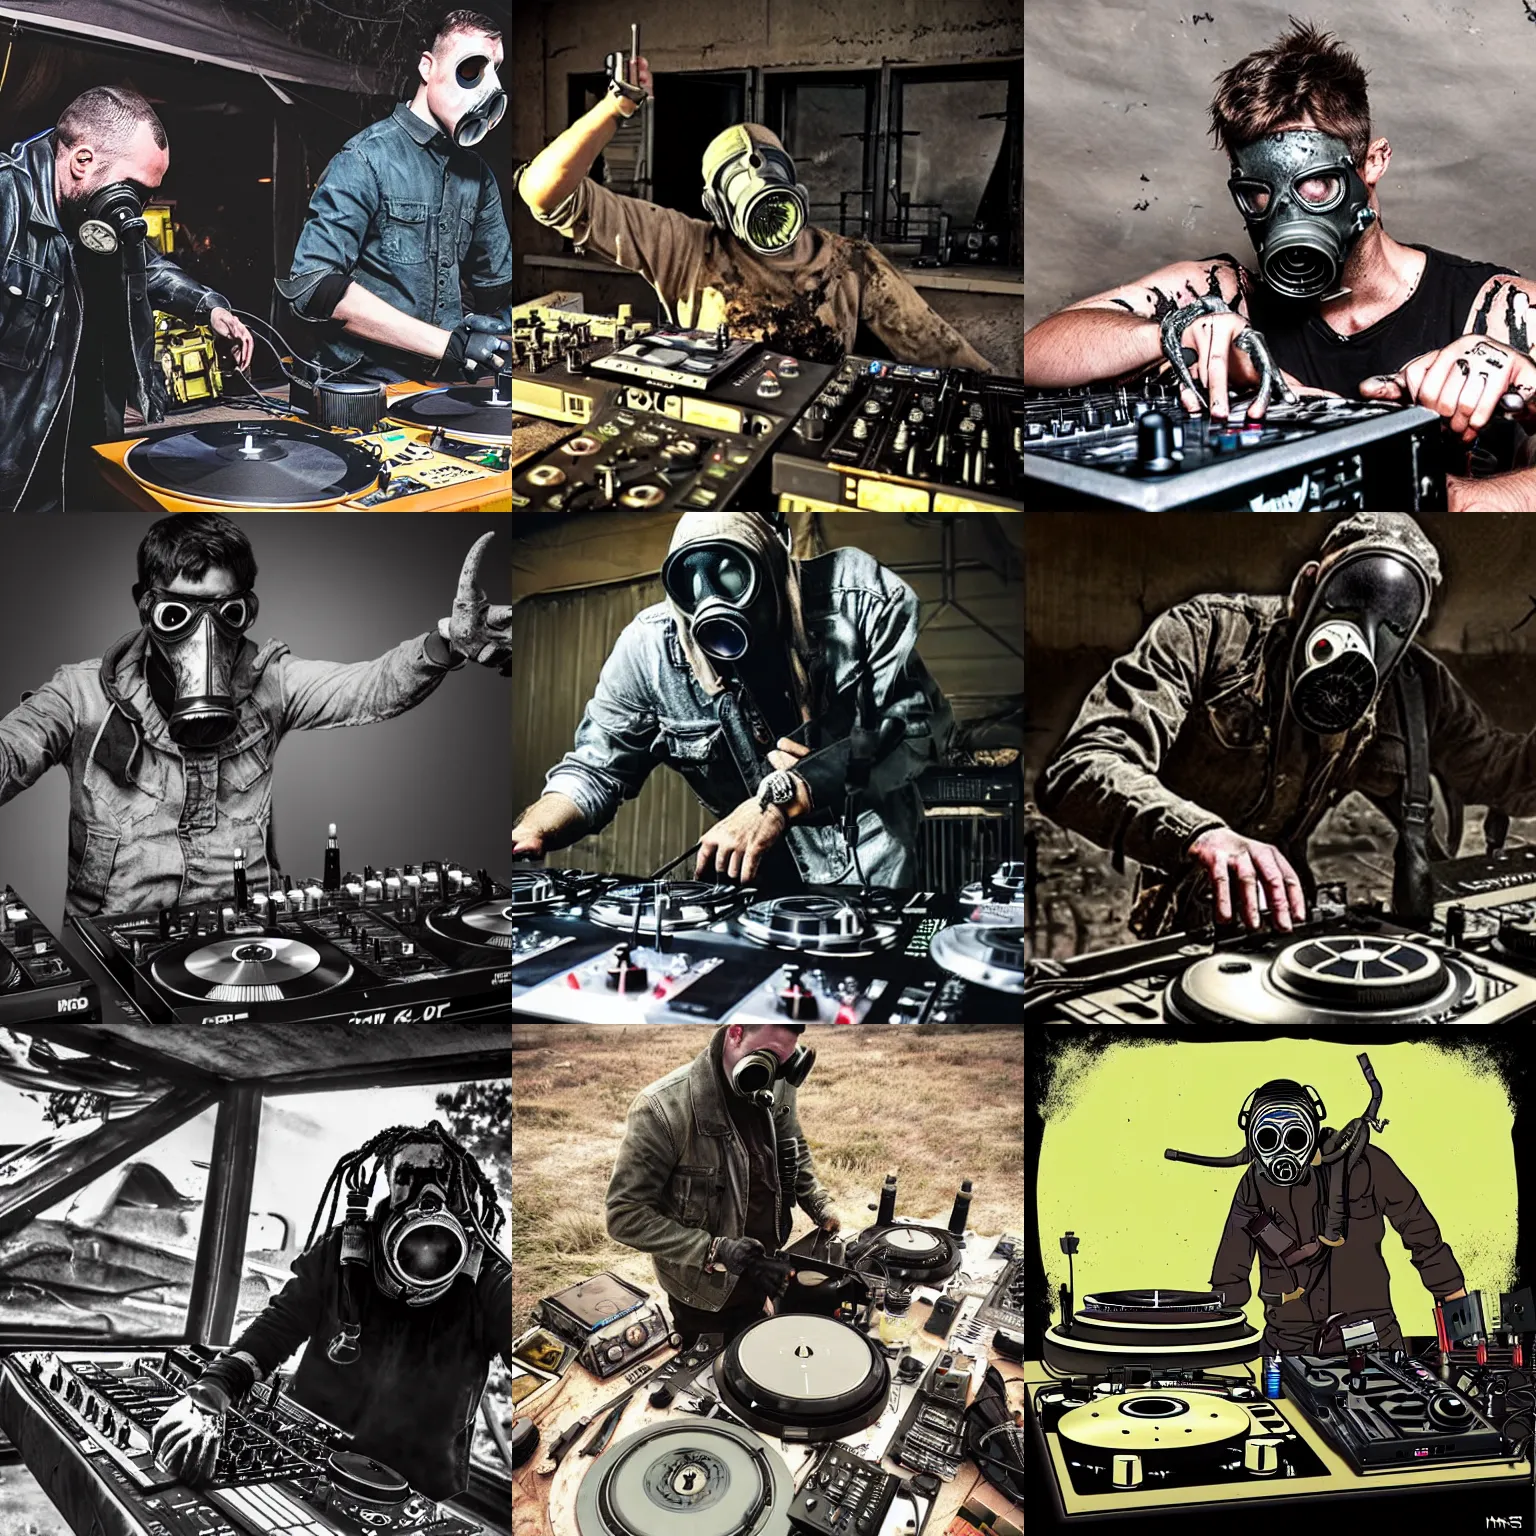 Prompt: gas mask mad max survivalist DJing with DJ turntables, in a wasteland zombie apocalypse